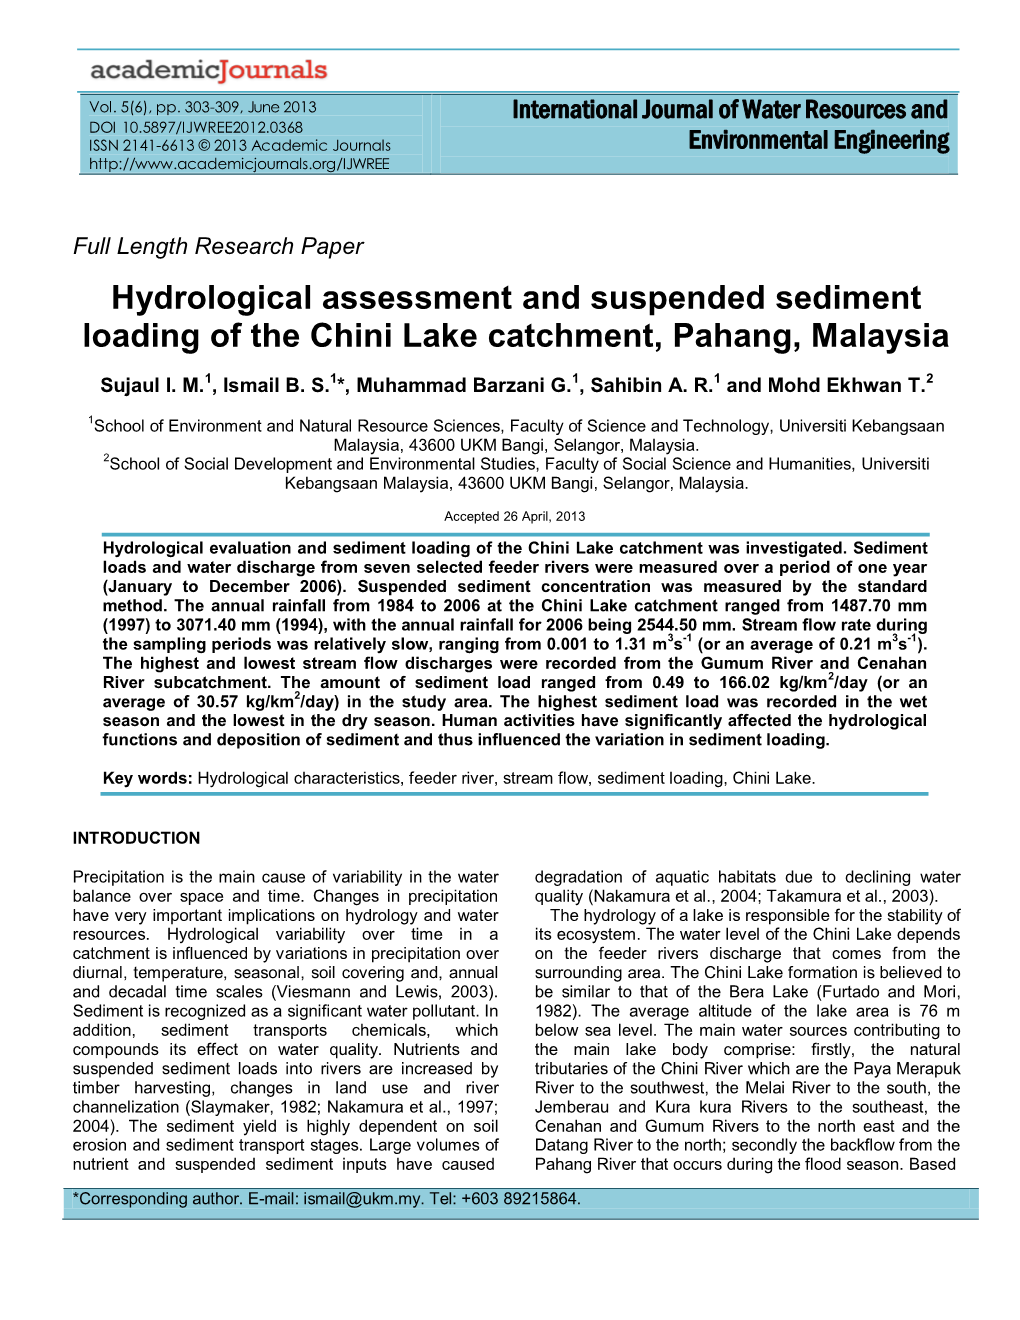 Hydrological Assessment and Suspended Sediment Loading of the Chini Lake Catchment, Pahang, Malaysia